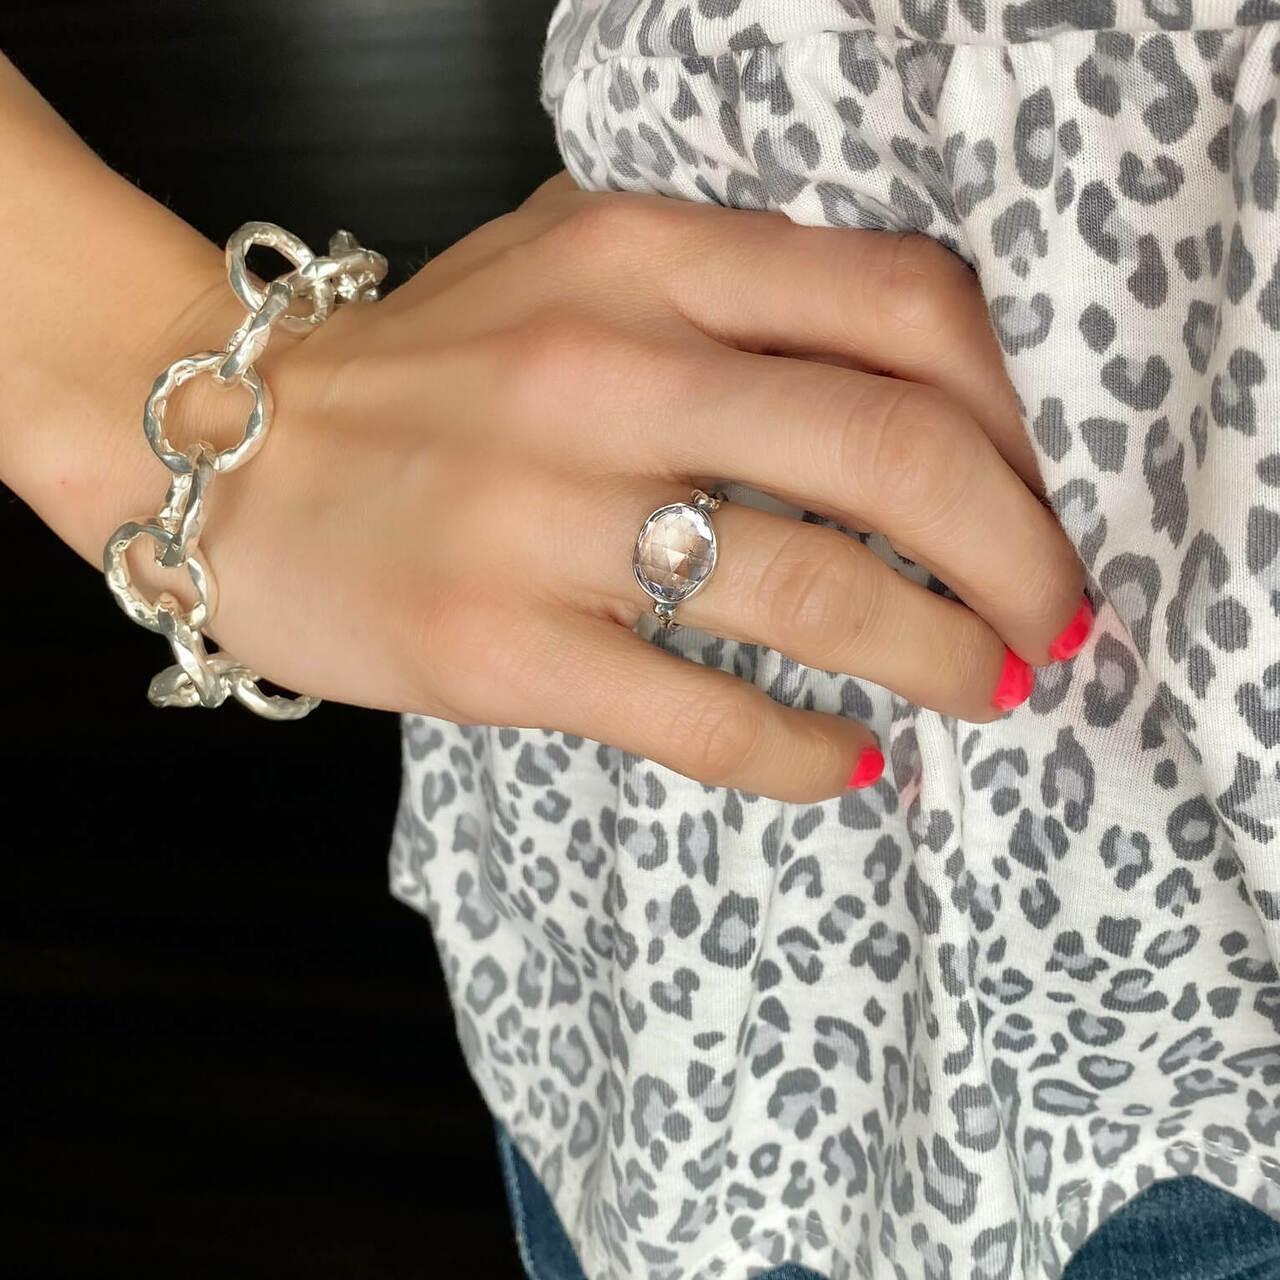 Light of Mine Ring paired with Today's Girl Bracelet